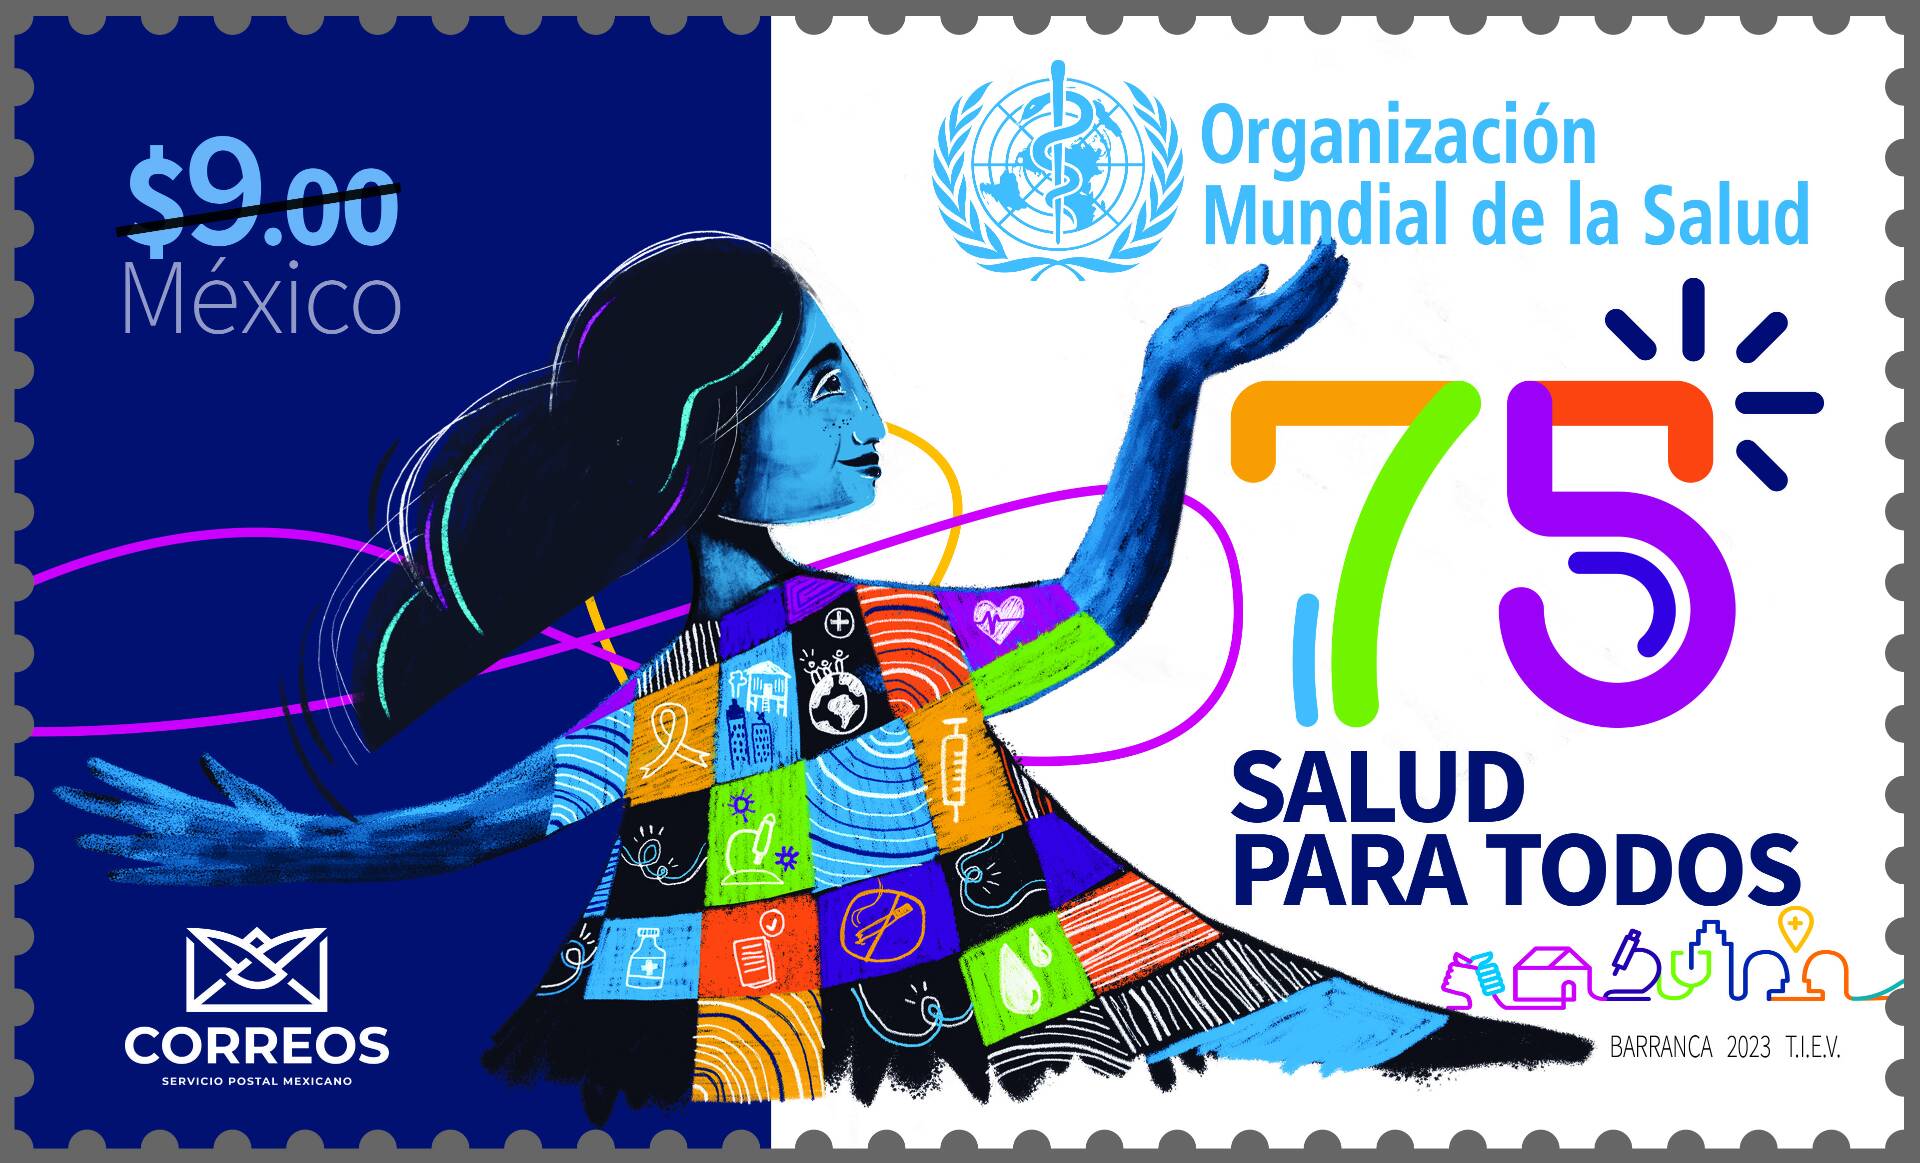 A commemorative stamp showing an illustration of mother health portraited as a woman holding her arms up in the air